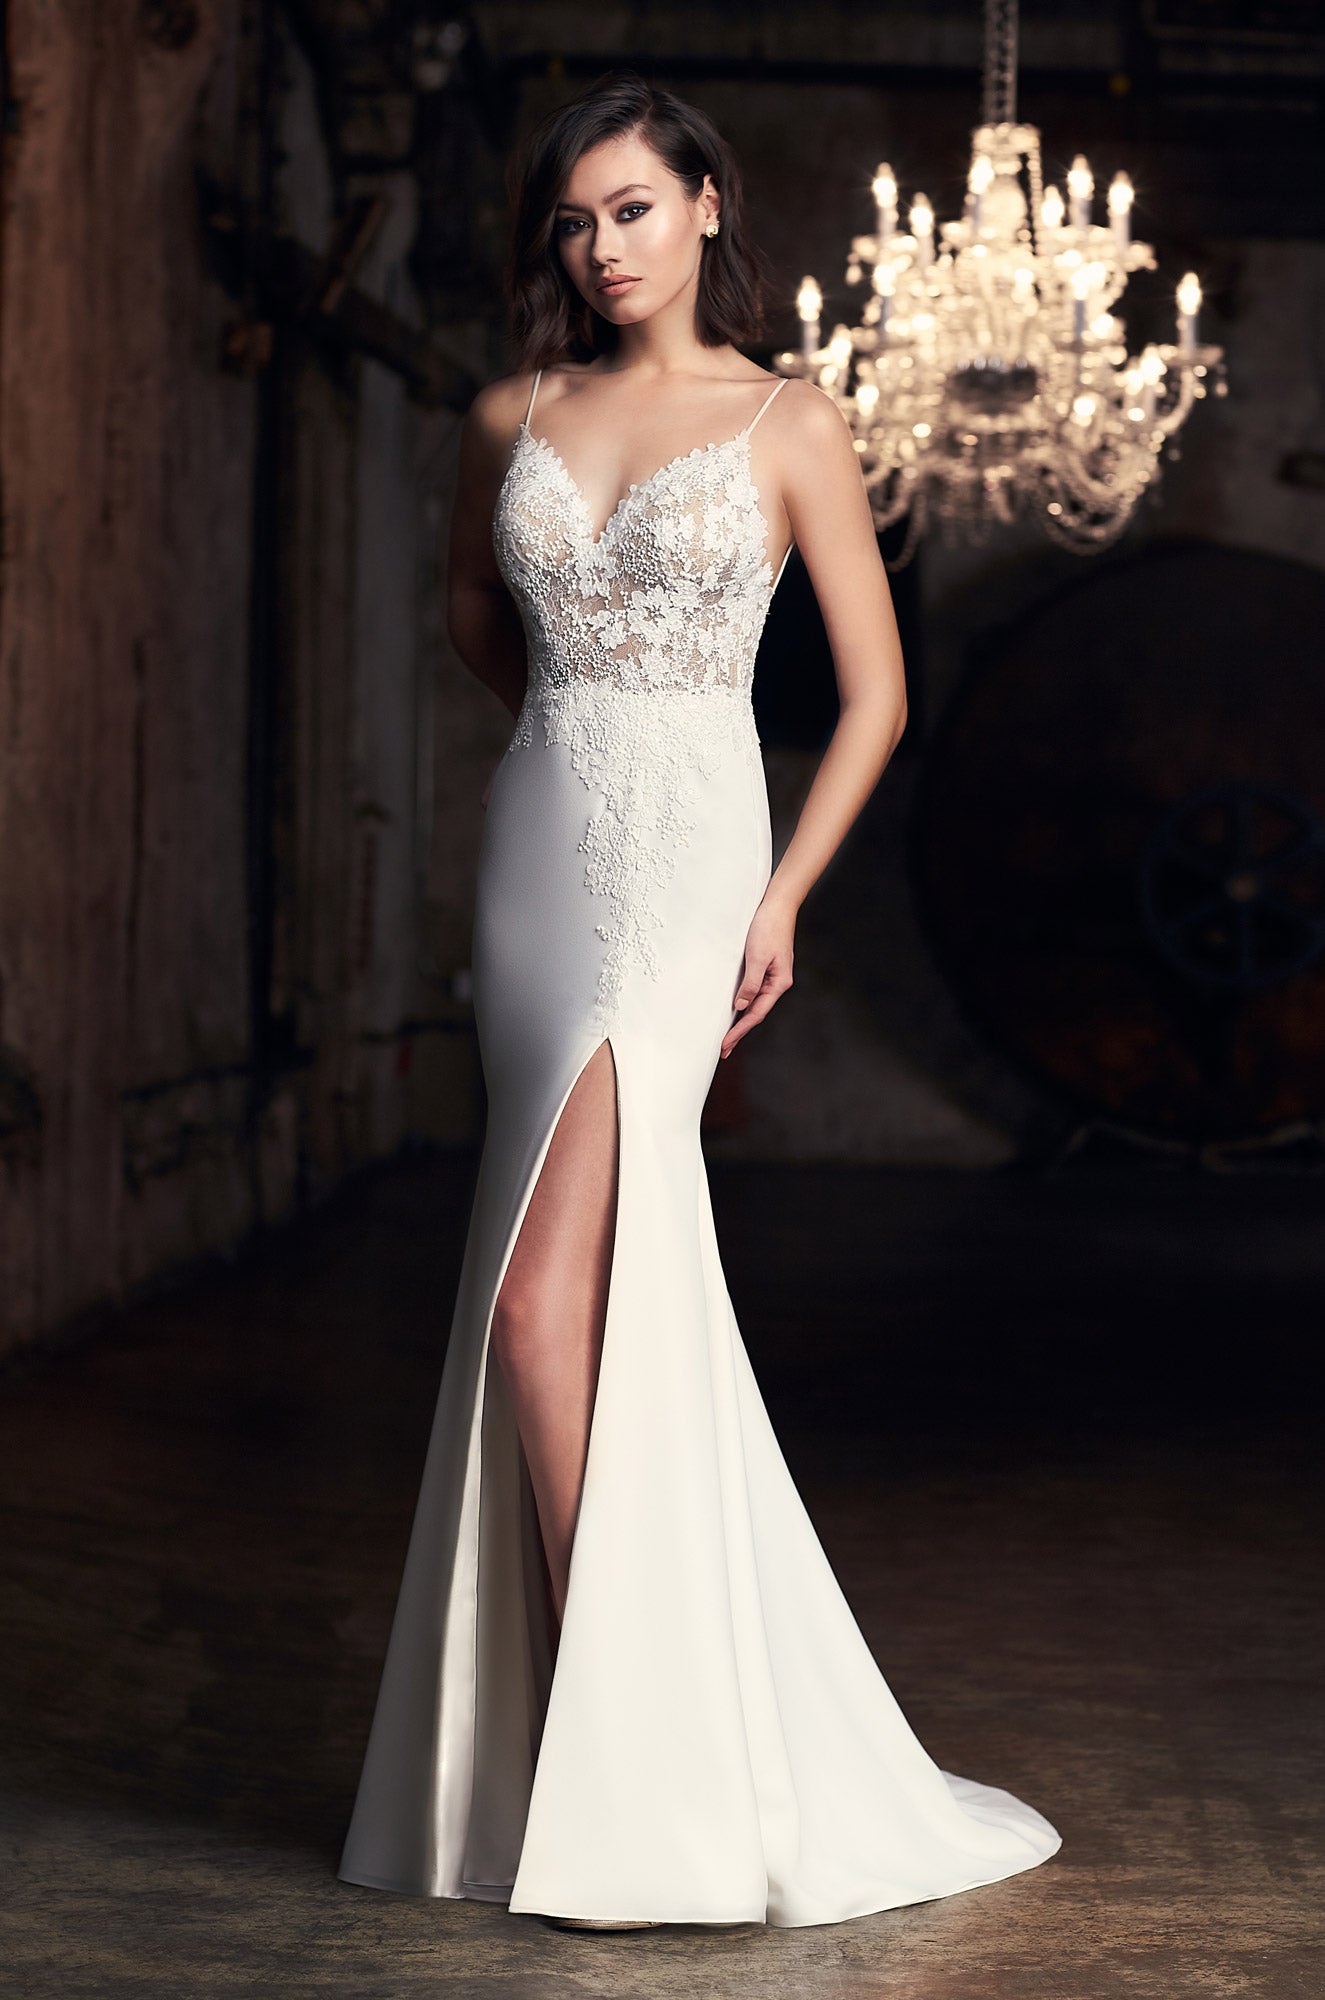 Spaghetti Strap Fit And Flare Wedding Dress With Slit